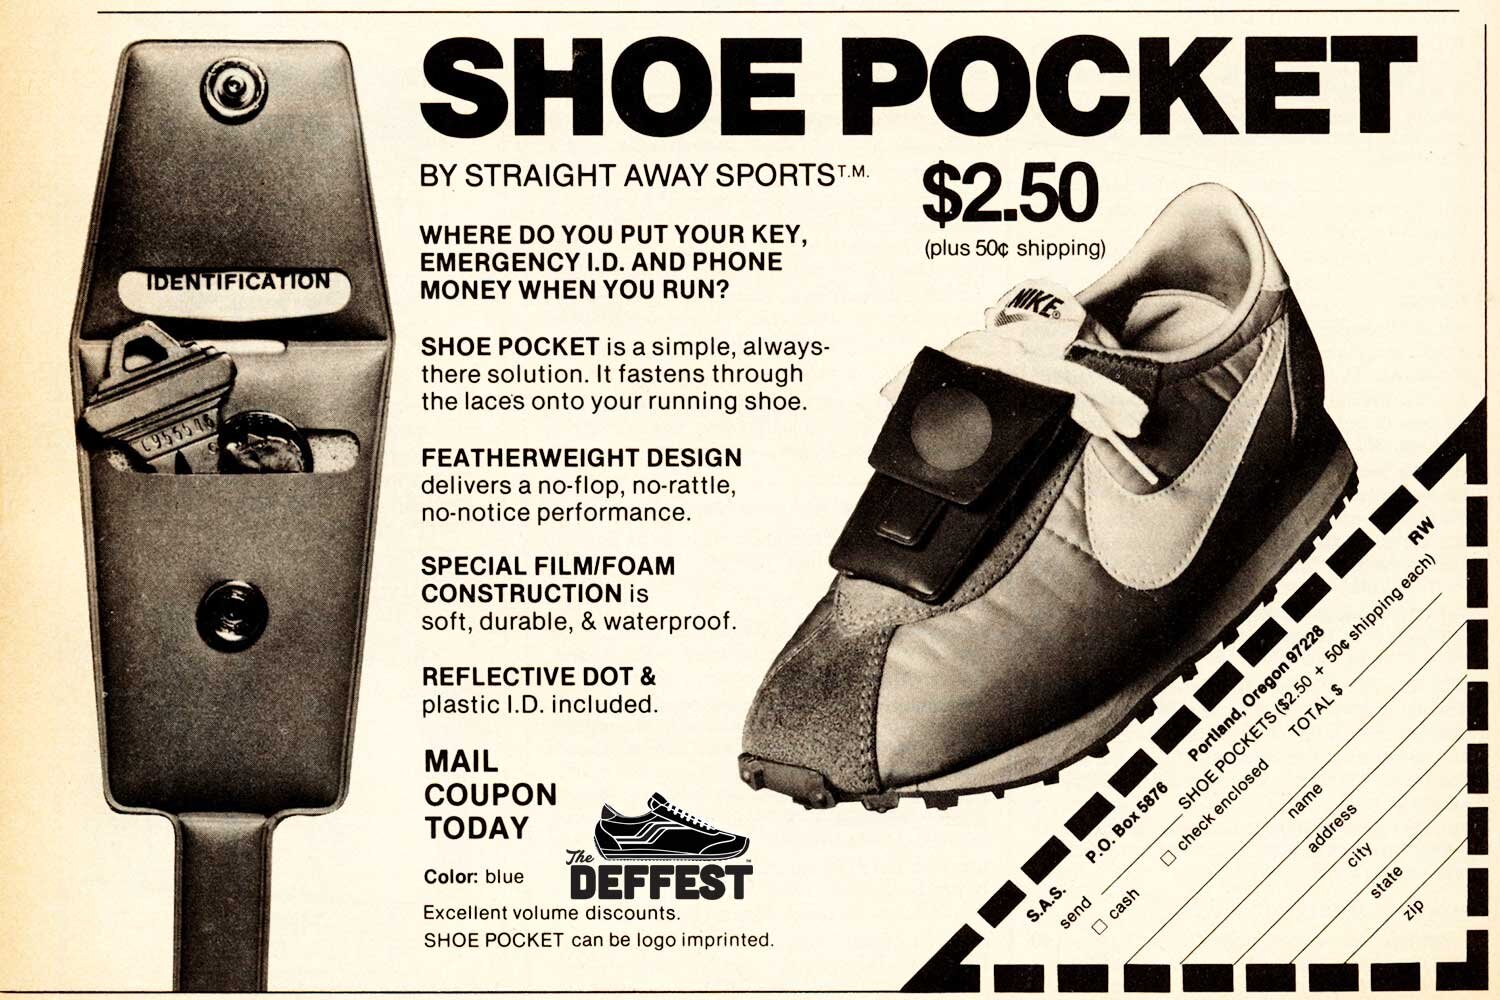 The Deffest®. A vintage and retro sneaker blog. — Vintage shoe pocket Nike  waffle ad from 1979